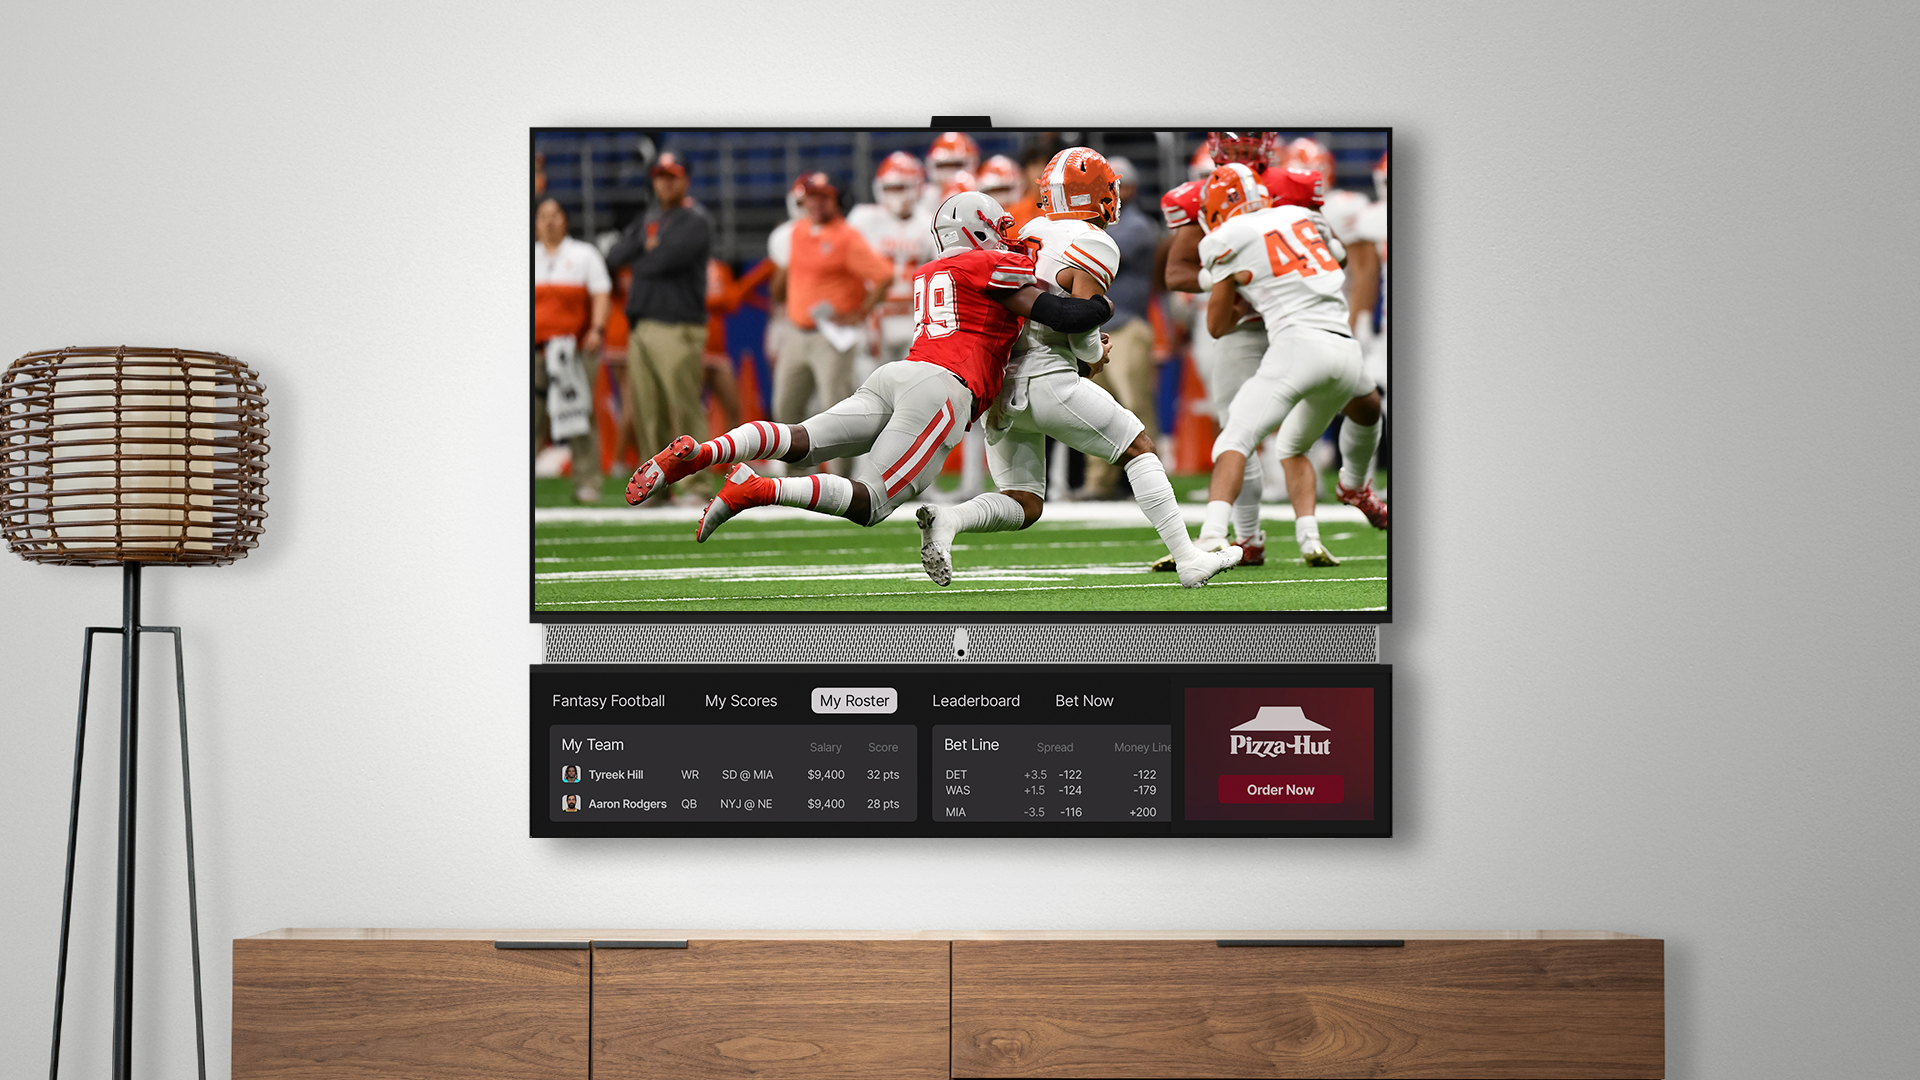 New DIRECTV STREAM Customers Will Receive Priority Registration For Tellys 55” Dual-Screen Television at No Cost Business Wire